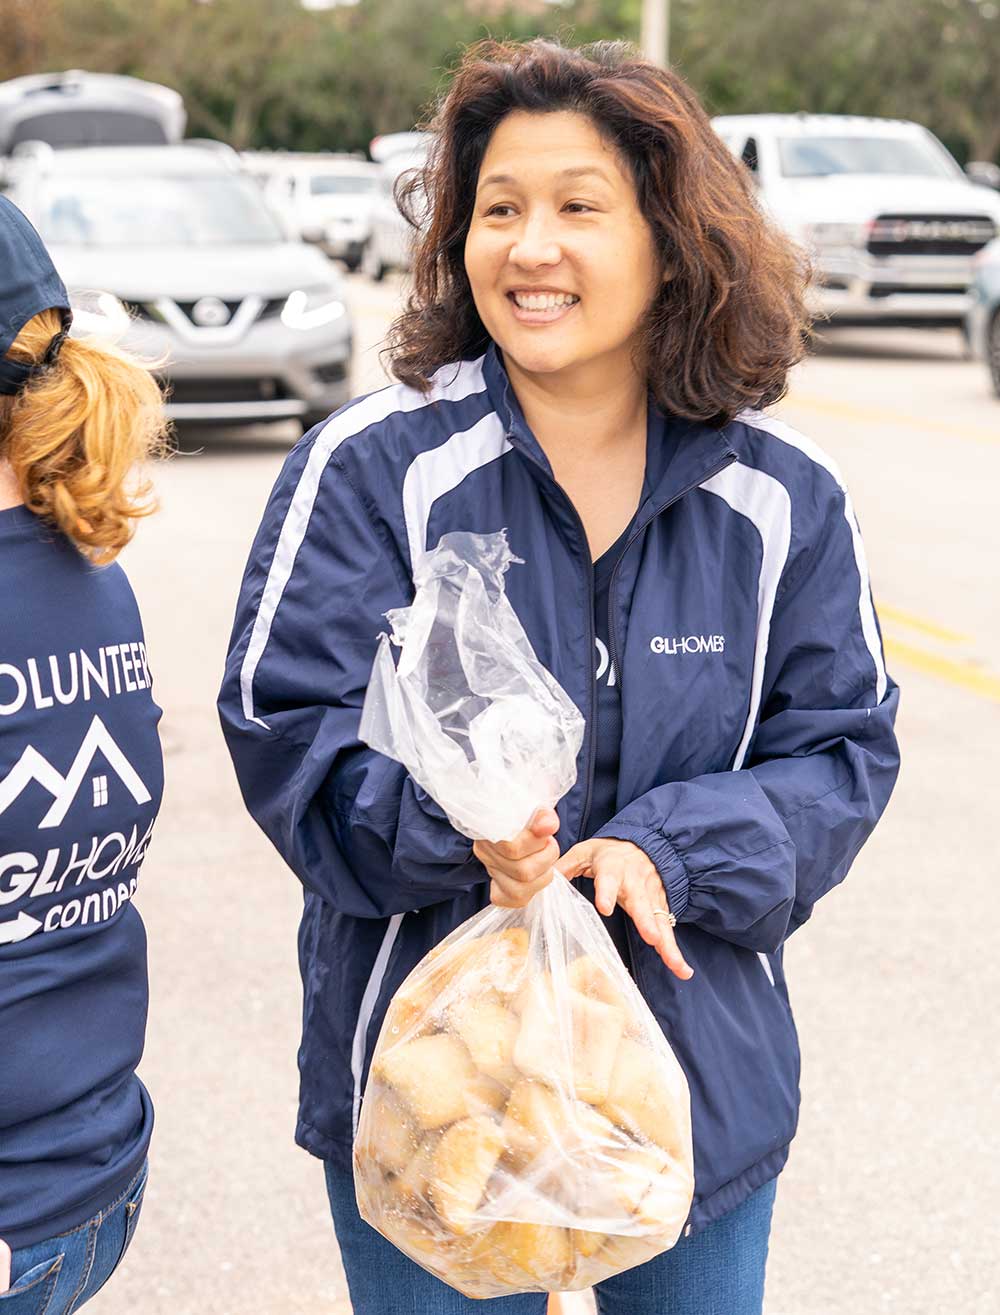 GL Homes distributes food for Thanksgiving.